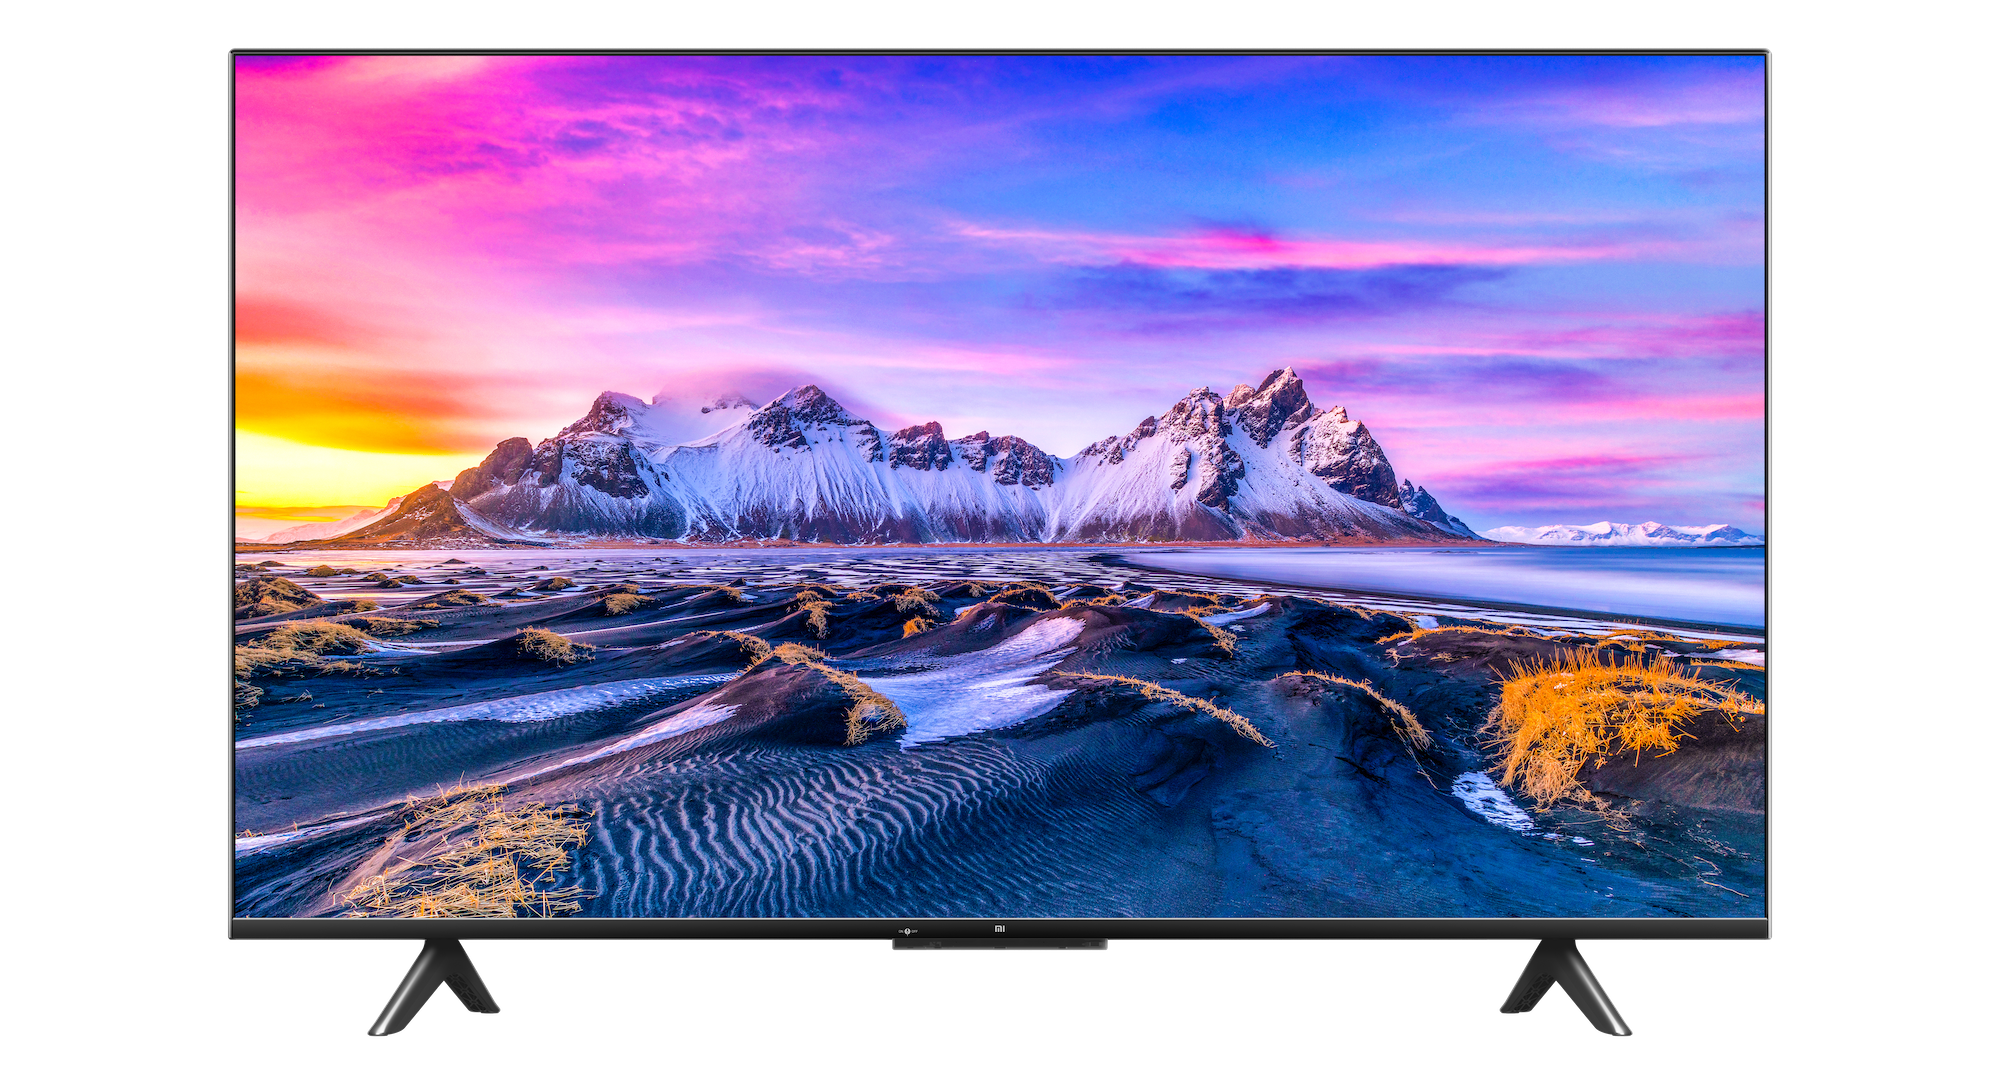 For the first time, Xiaomi launched a high-end 4K smart TV line in Vietnam - Photo 1.